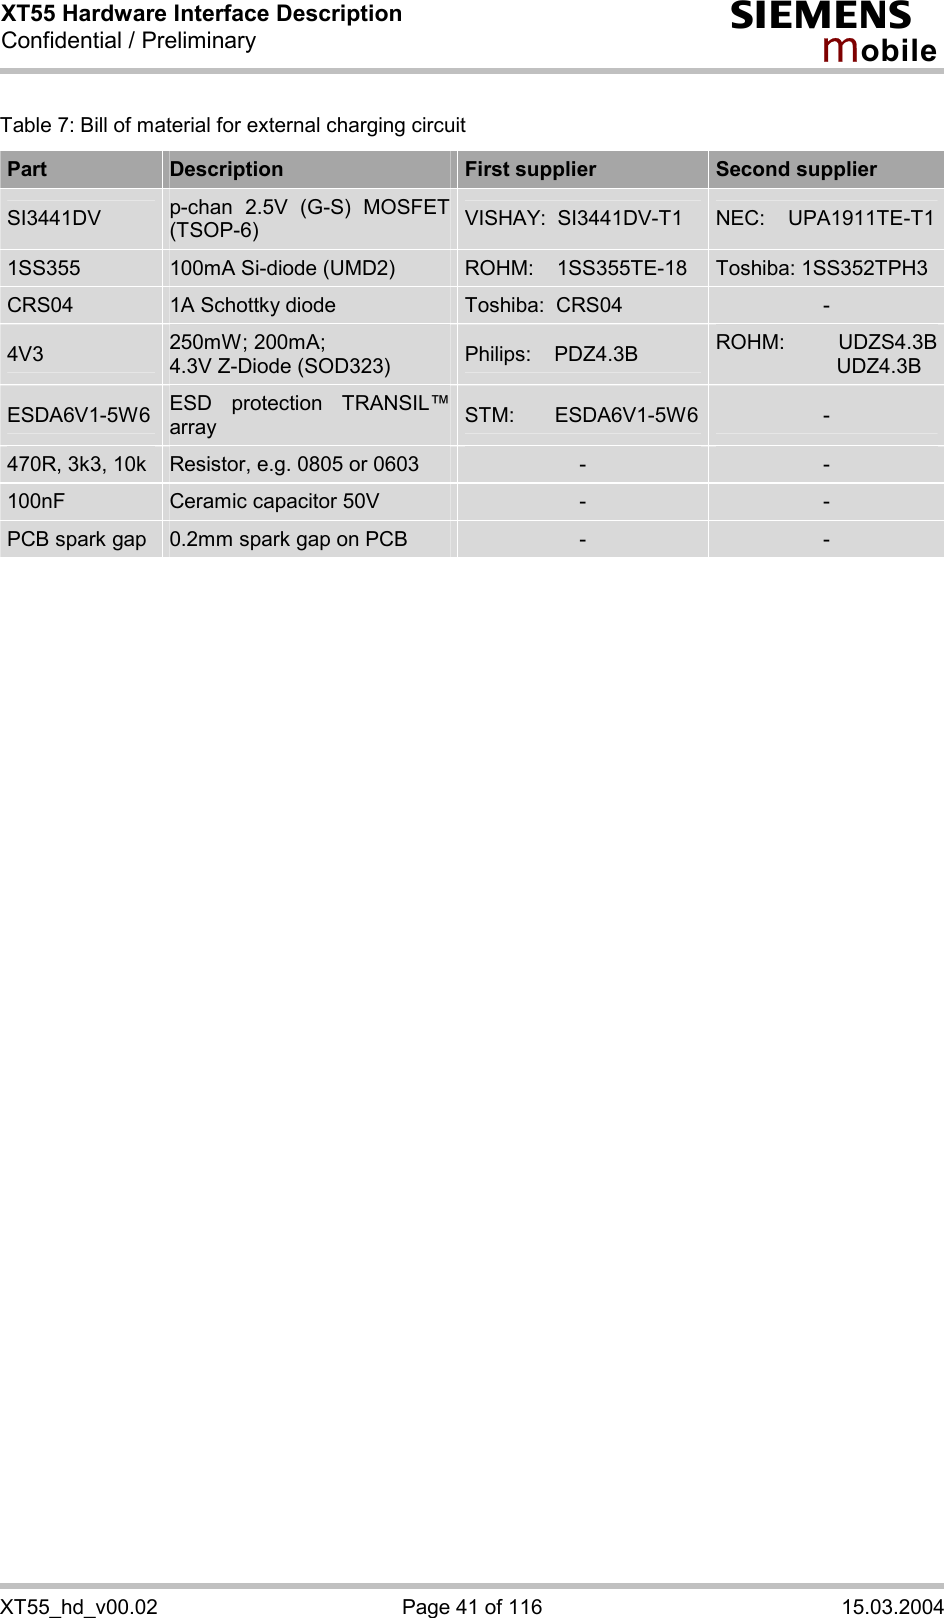 XT55 Hardware Interface Description Confidential / Preliminary s mo b i l e XT55_hd_v00.02  Page 41 of 116  15.03.2004 Table 7: Bill of material for external charging circuit Part  Description  First supplier  Second supplier SI3441DV  p-chan 2.5V (G-S) MOSFET (TSOP-6)  VISHAY:  SI3441DV-T1  NEC:    UPA1911TE-T11SS355  100mA Si-diode (UMD2)  ROHM:    1SS355TE-18  Toshiba: 1SS352TPH3 CRS04  1A Schottky diode   Toshiba:  CRS04  - 4V3  250mW; 200mA; 4.3V Z-Diode (SOD323)  Philips:    PDZ4.3B  ROHM: UDZS4.3B                     UDZ4.3B ESDA6V1-5W6  ESD protection TRANSIL™ array  STM:       ESDA6V1-5W6  - 470R, 3k3, 10k  Resistor, e.g. 0805 or 0603  -  - 100nF  Ceramic capacitor 50V  -  - PCB spark gap  0.2mm spark gap on PCB  -  -  